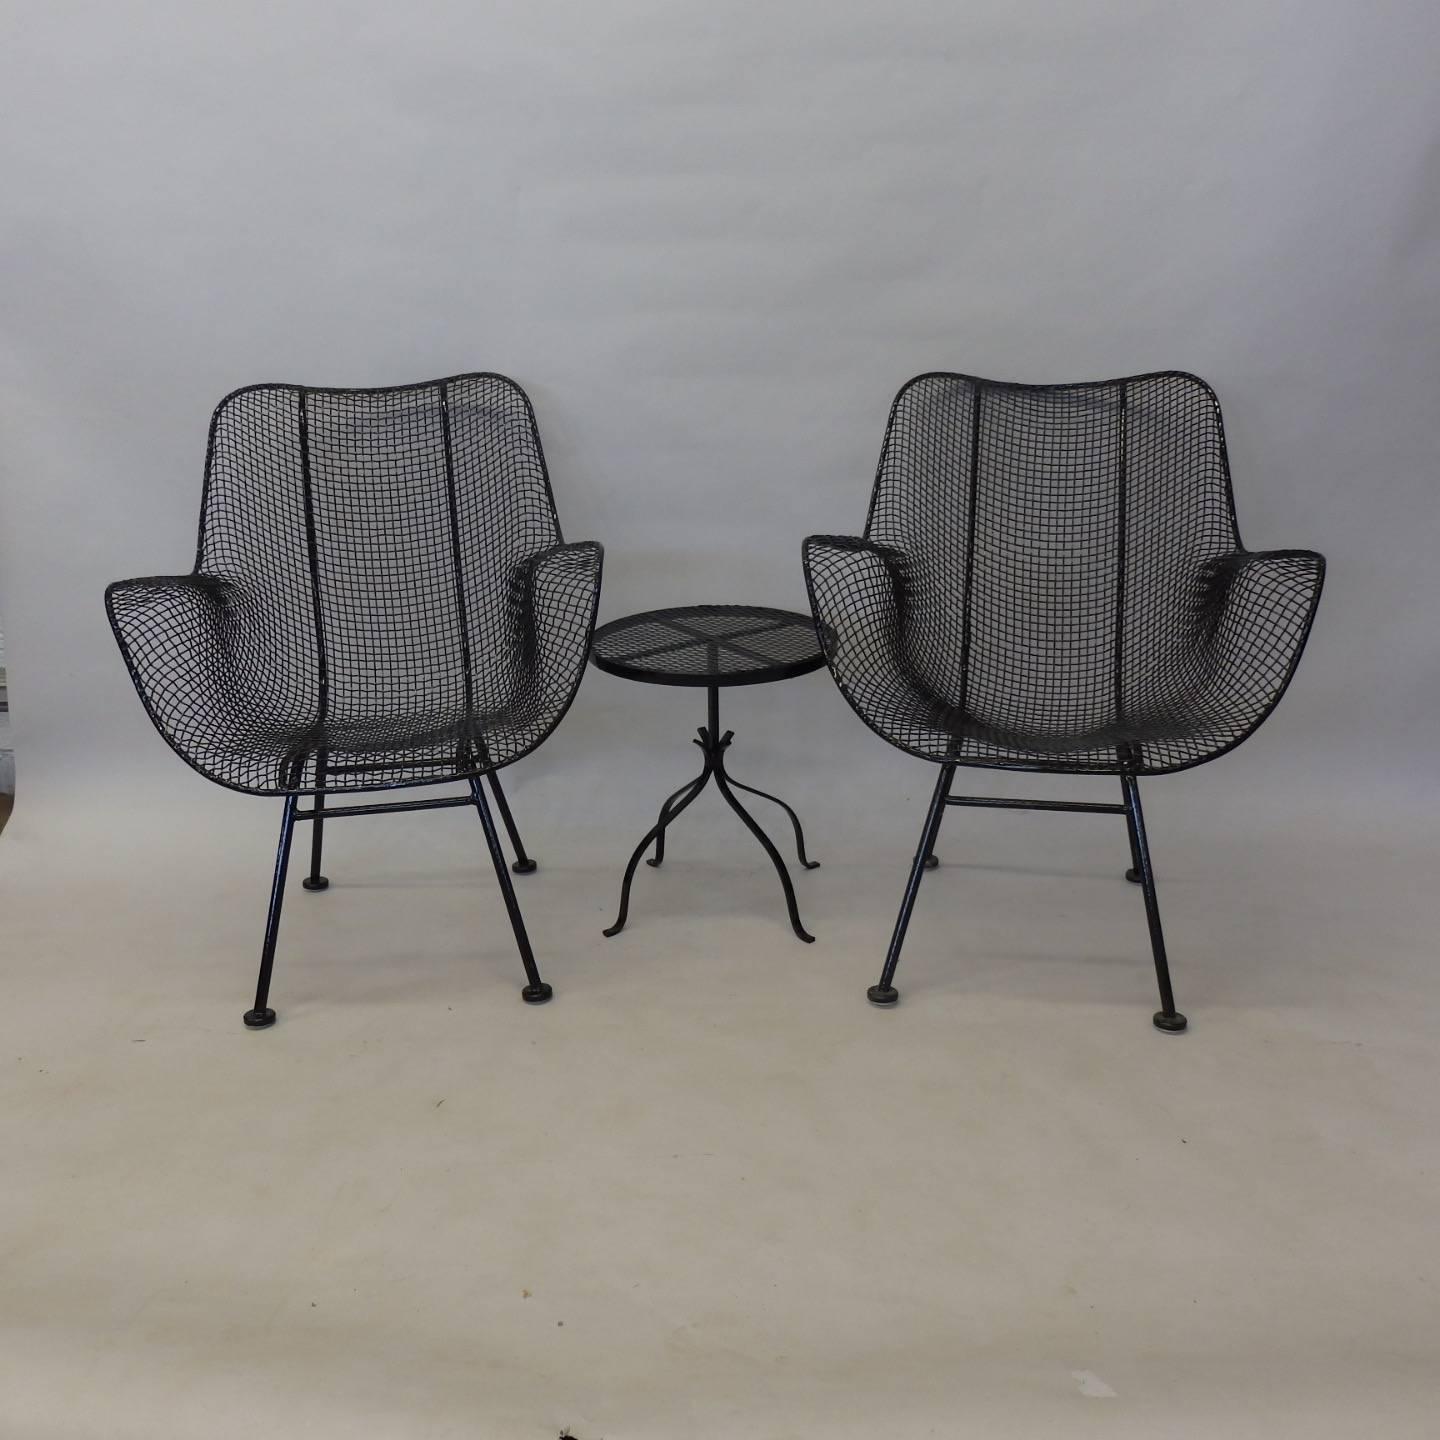 Pair of nicely restored Woodard high back lounge chairs. Small occasional table drinks stand makes for a nice three-piece set . All pieces are powder coated in gloss black with new foot glides installed.